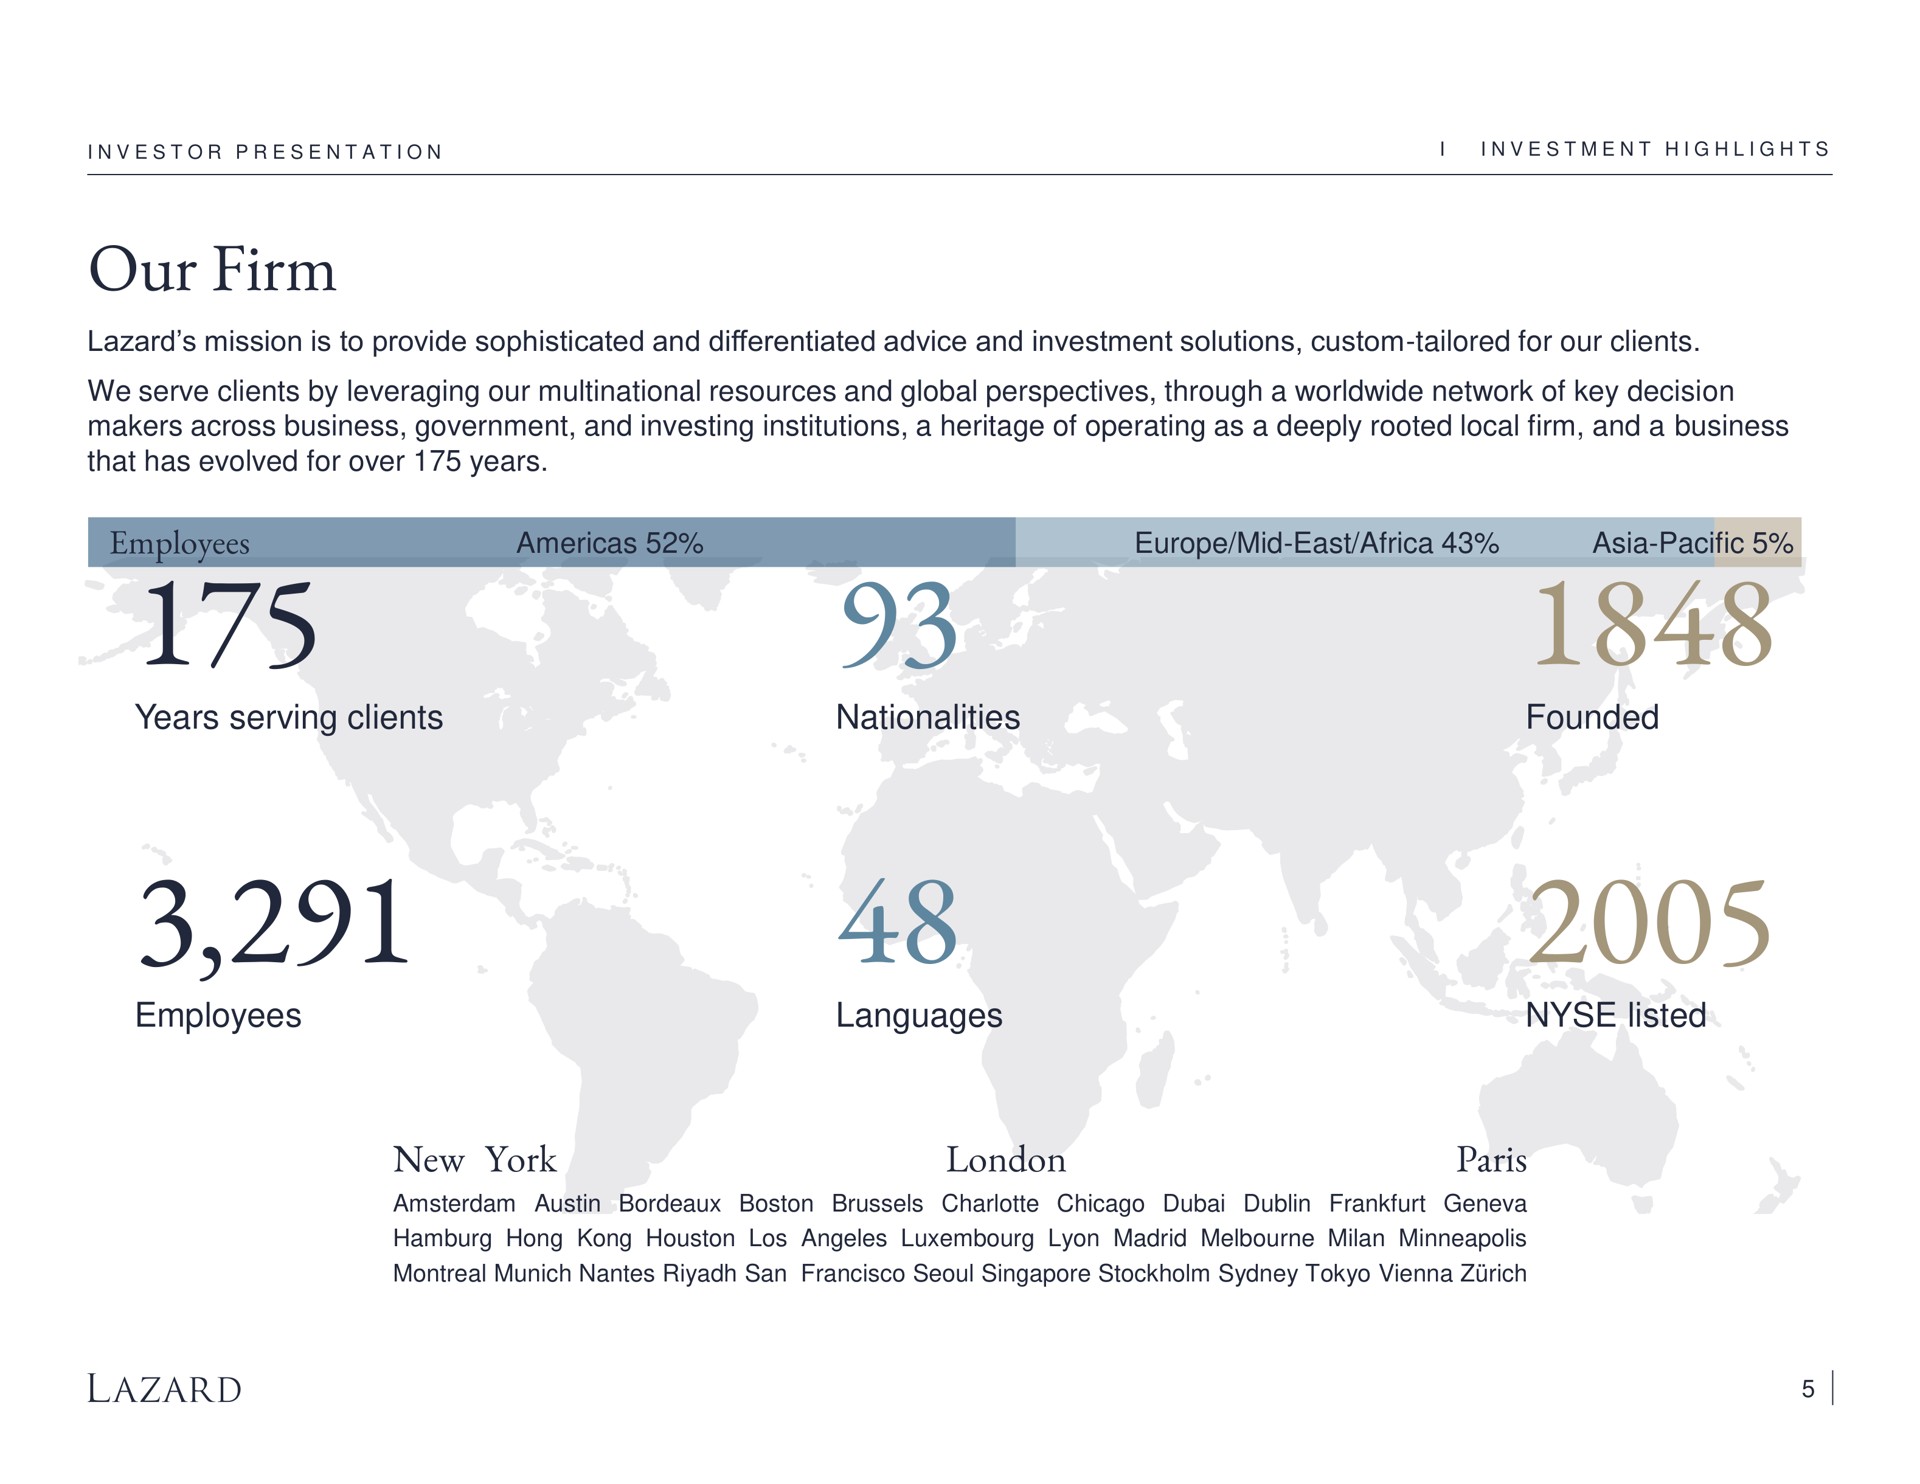 our firm employees years serving clients employees nationalities languages founded listed new york | Lazard